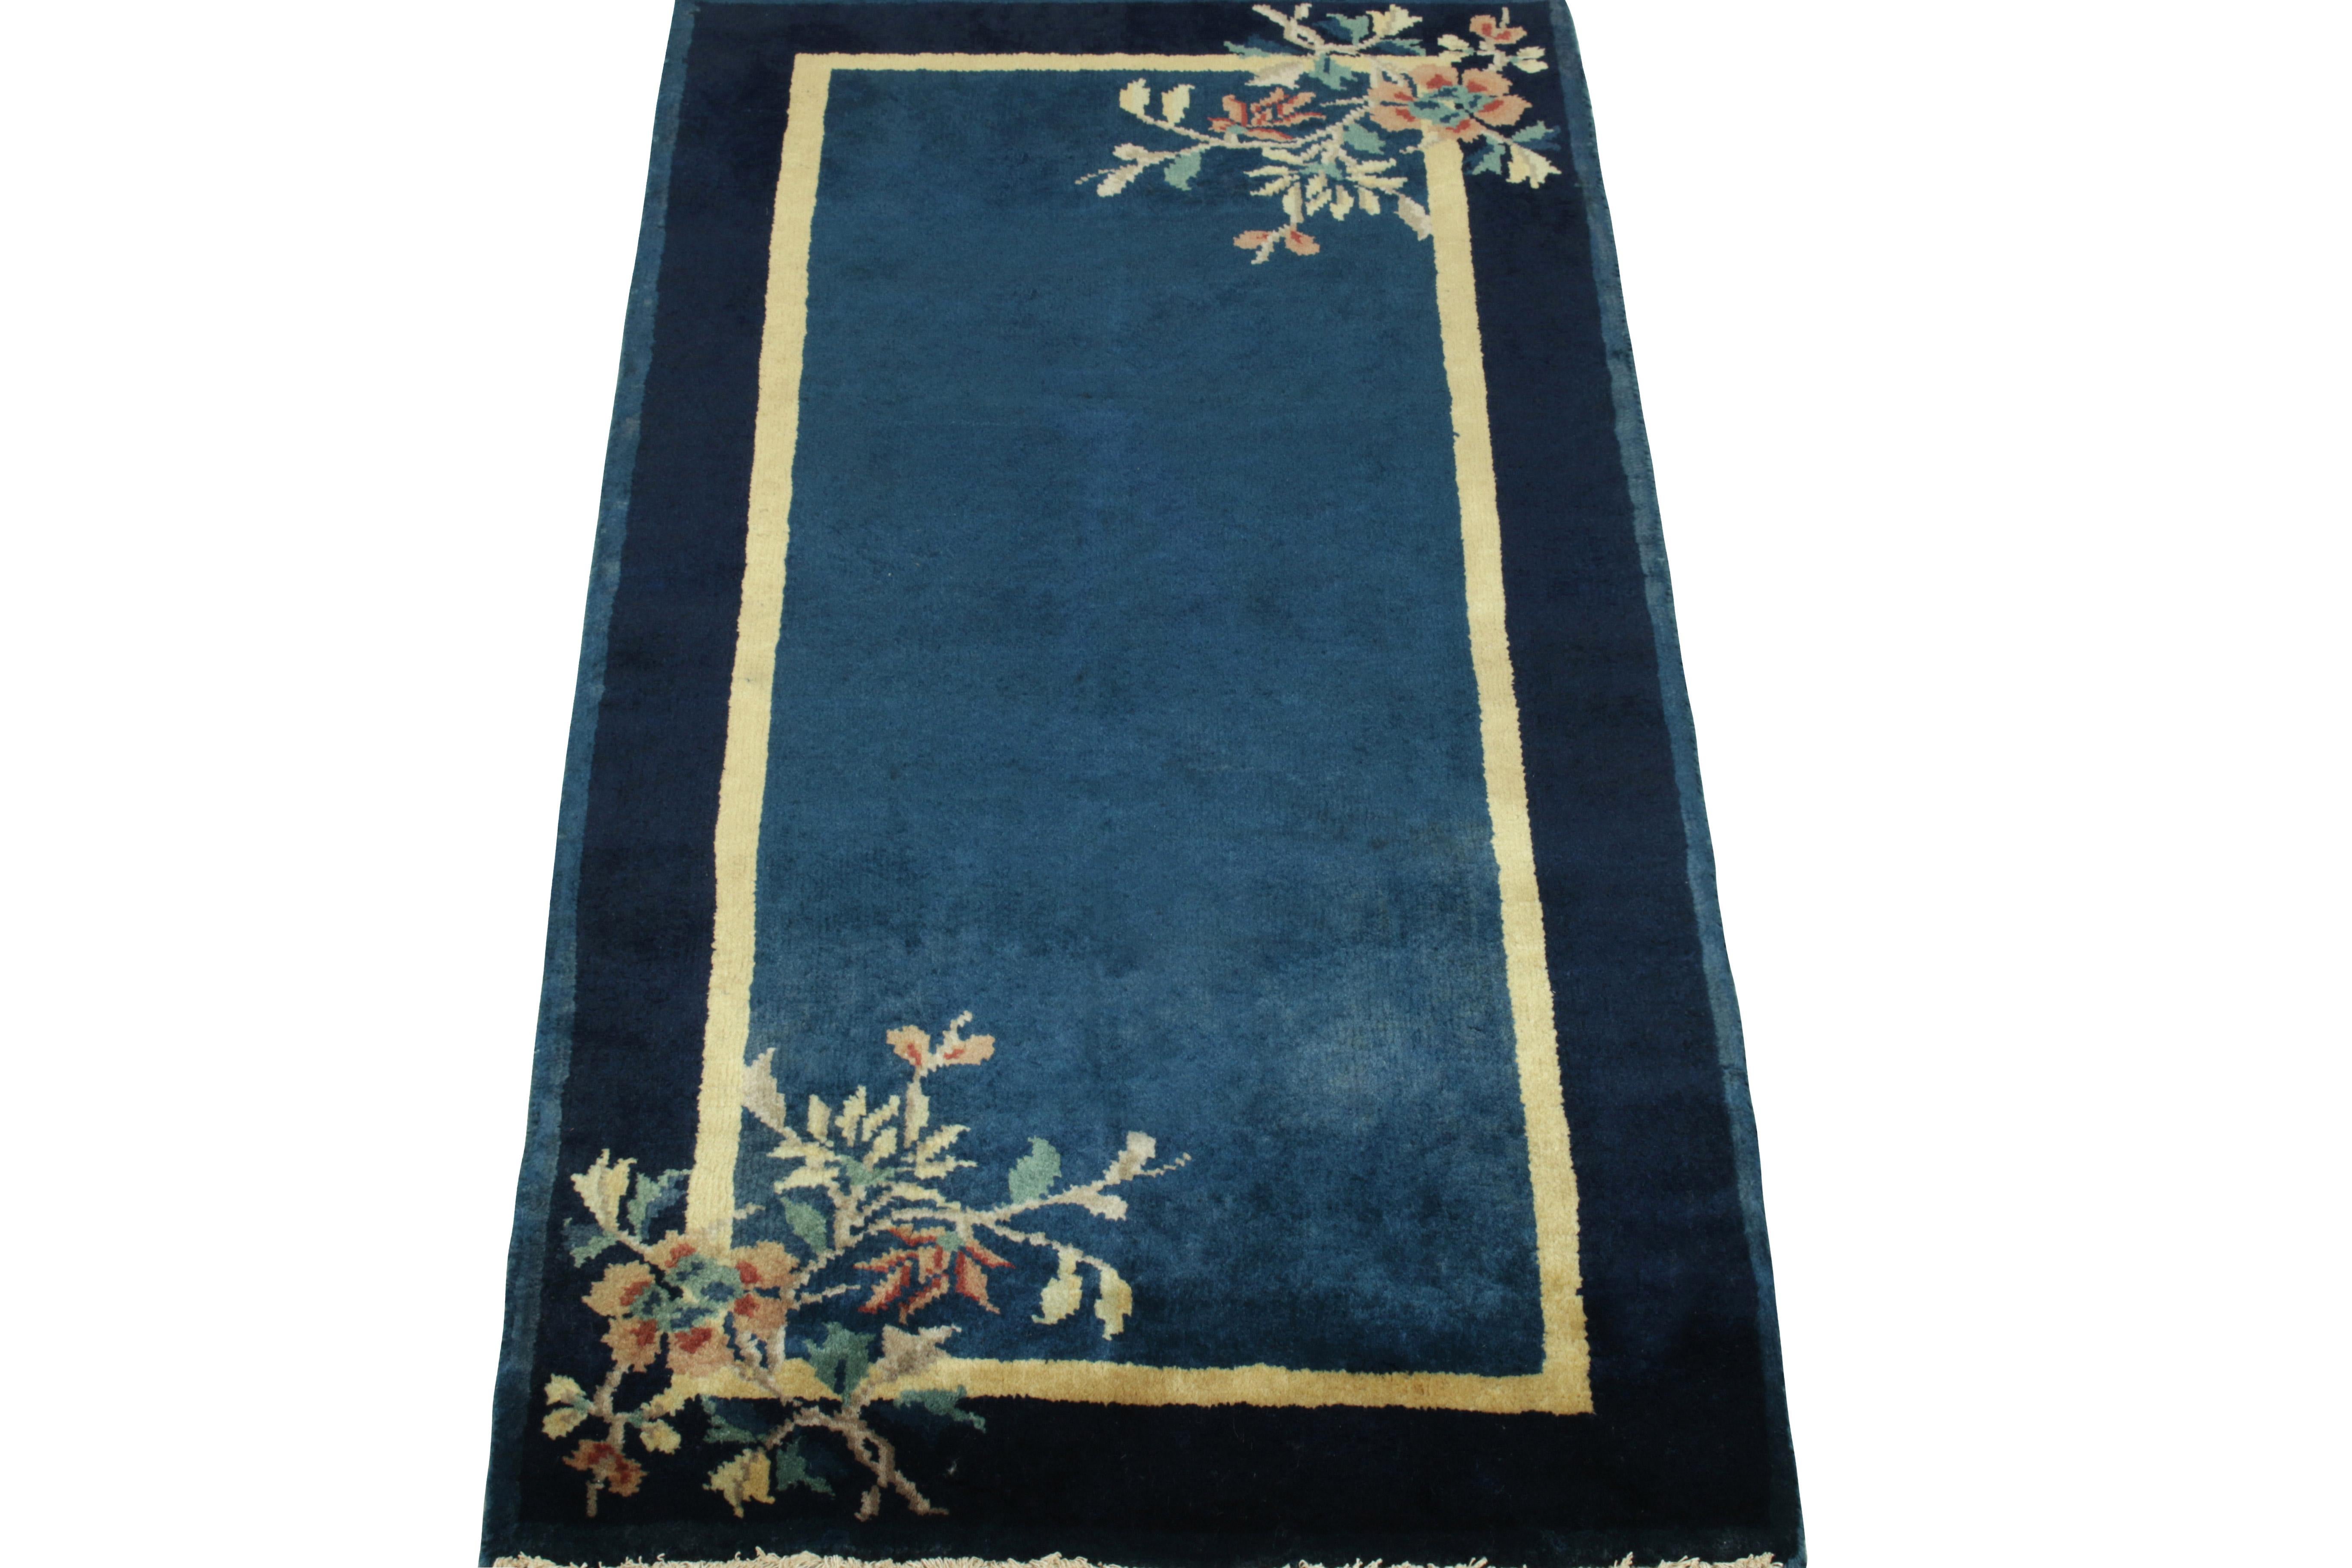 Enjoying a floral pattern in teal, reddish orange & pastel yellow hues in the outer border, a Chinese Deco style vintage rug observing light-dark spots in blue tones connoting a very classic appeal of the 1920s. Further boasting a fine light gold